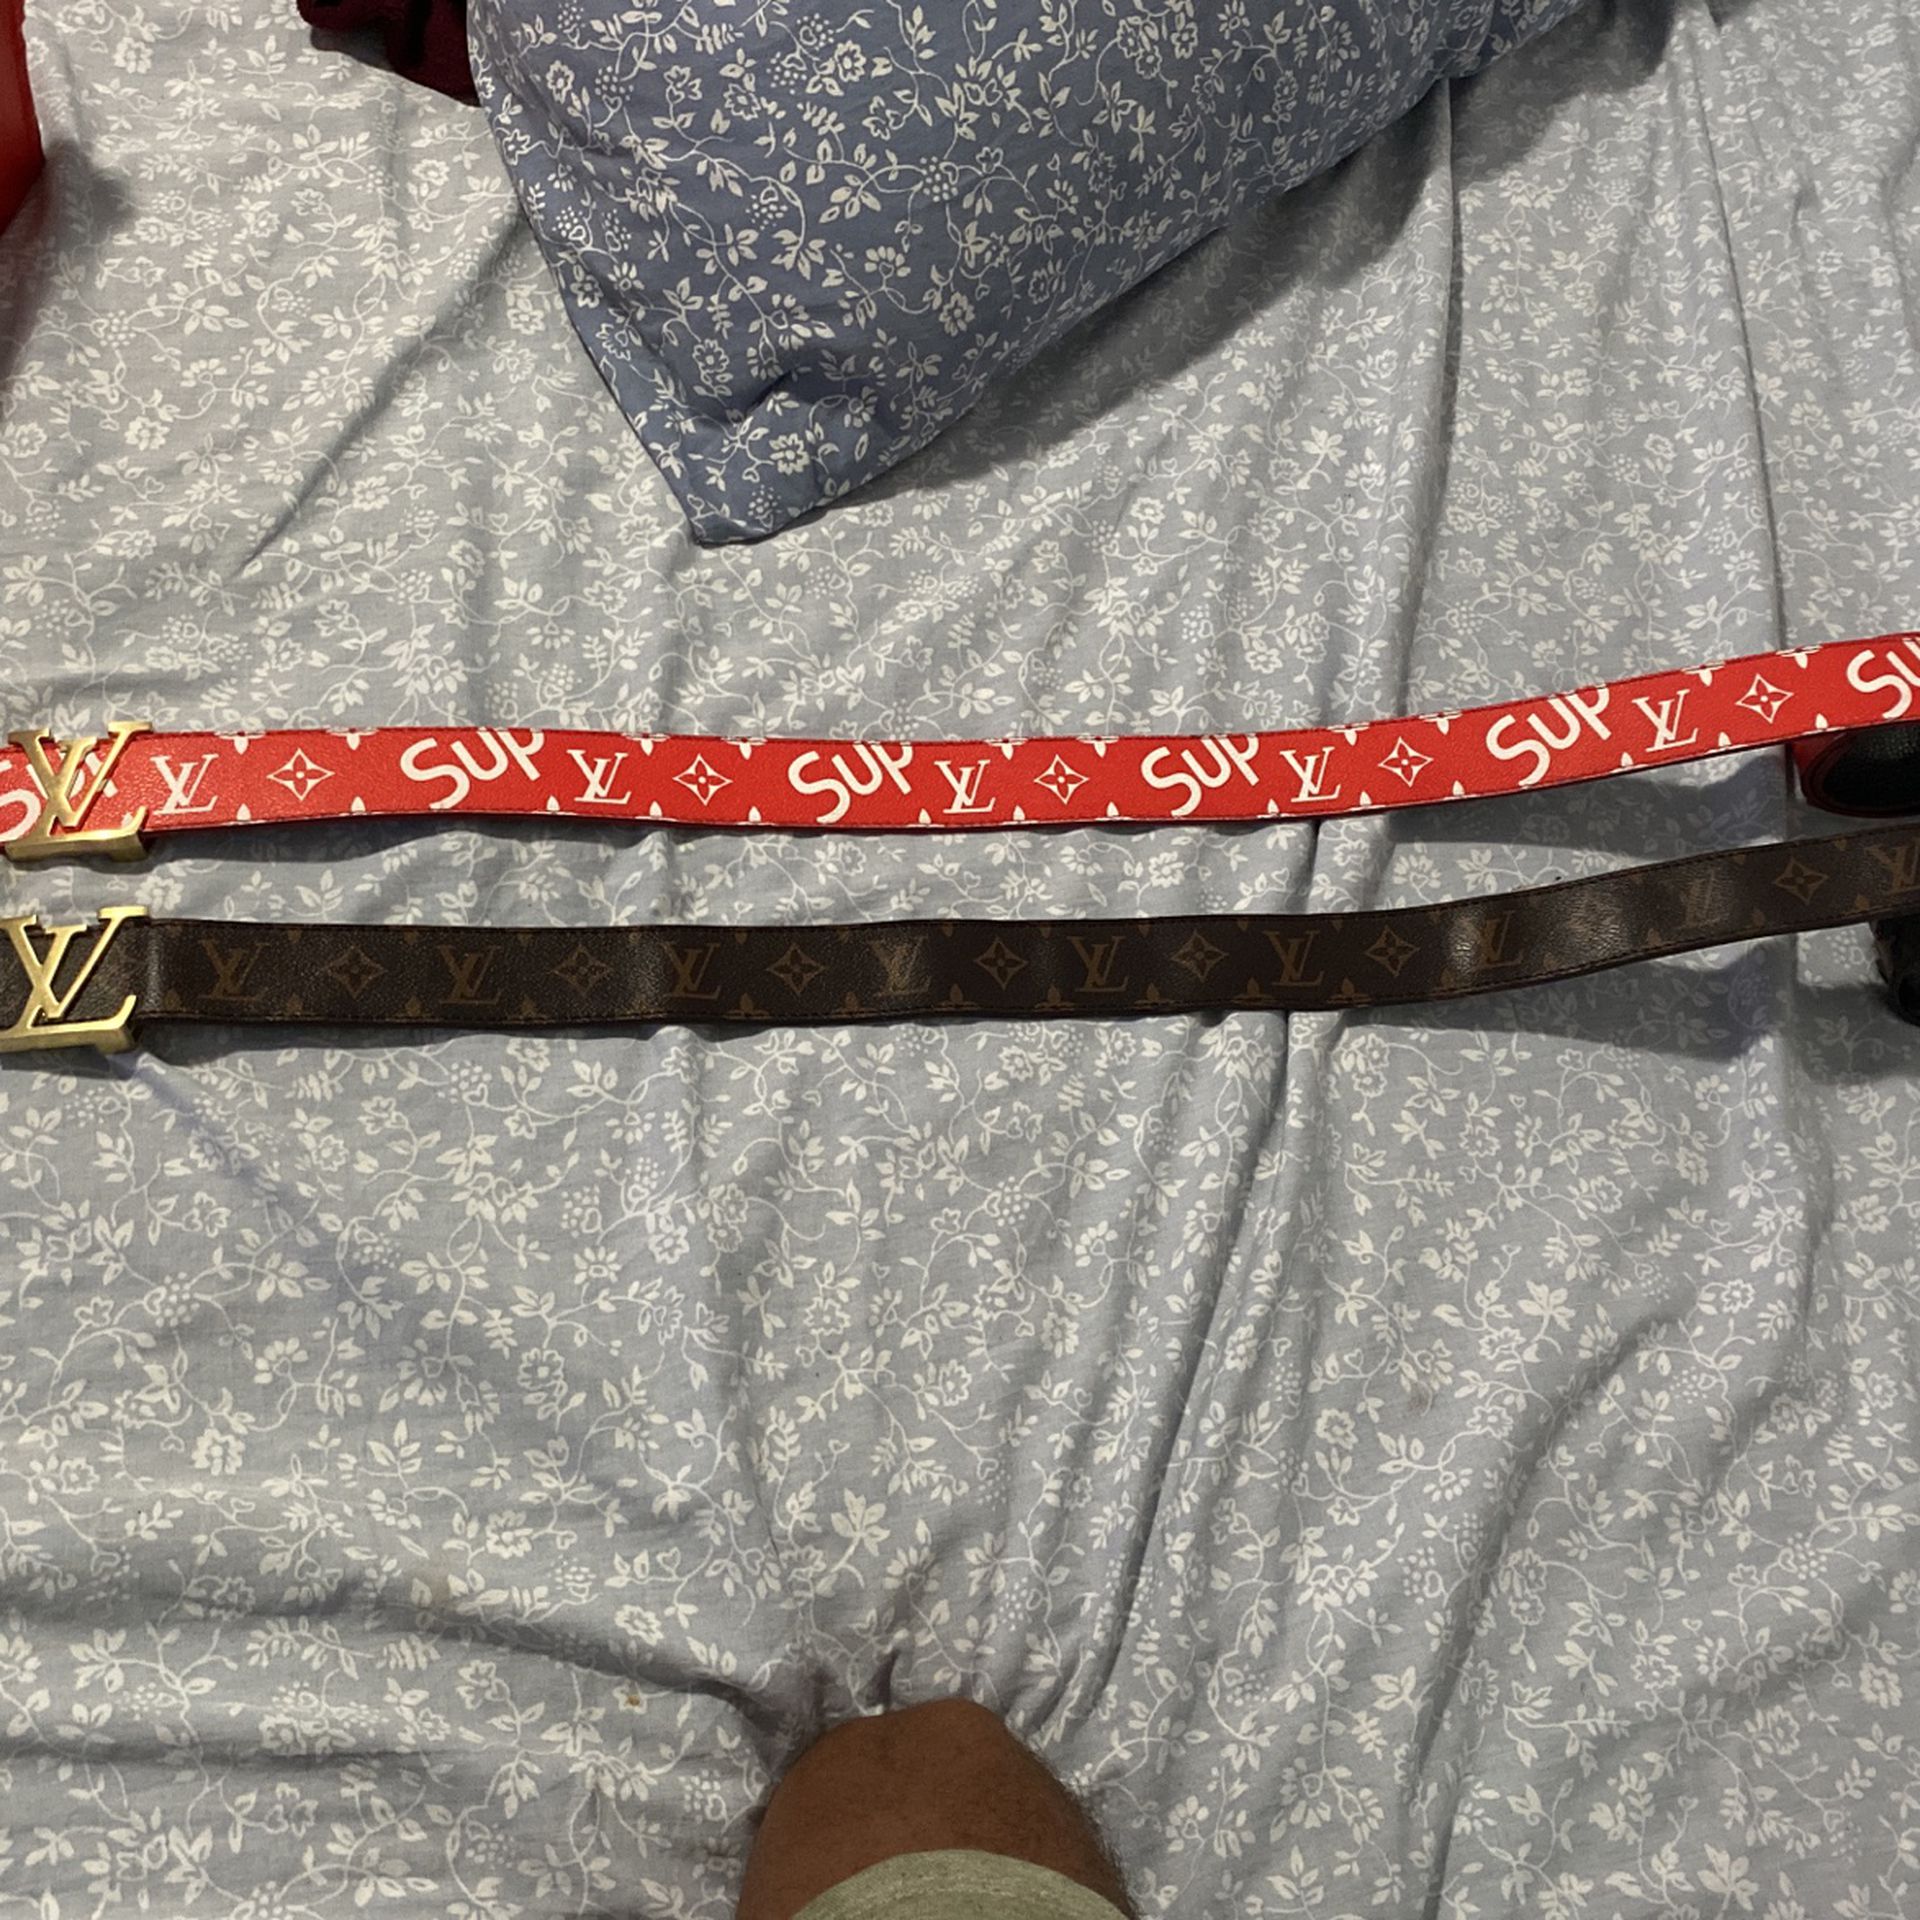 Memorial Day Special! Red Louis Vuitton Supreme Belt $50! for sale